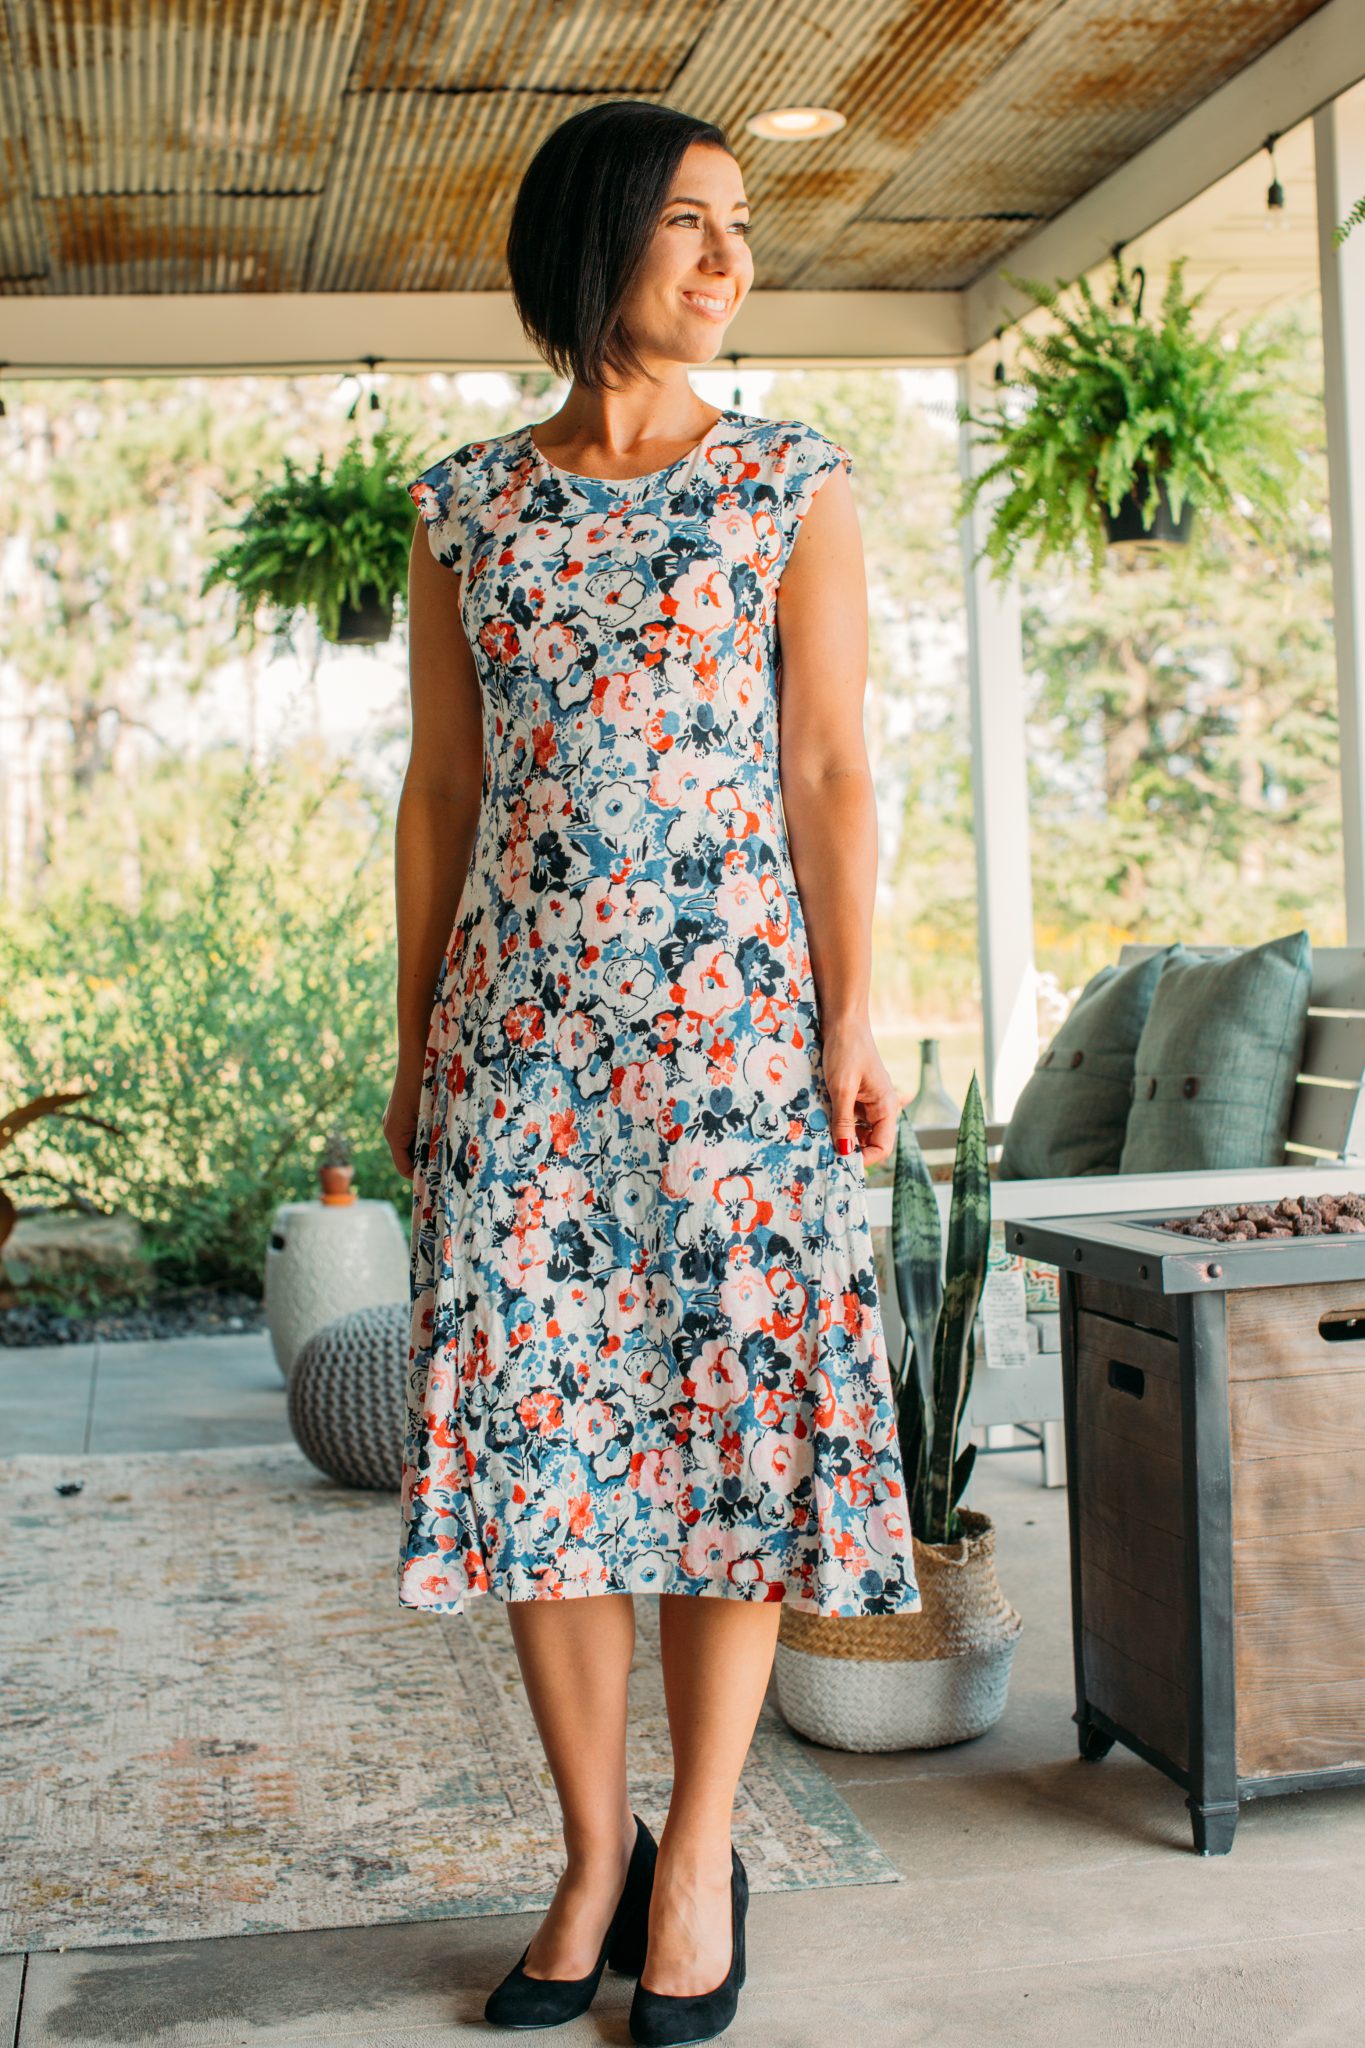 A woman wears a colorful floral printed Ralph Lauren midi dress. The dress has colorful orange and blue flowers throughout, with short cap sleeves and a high neckline. 